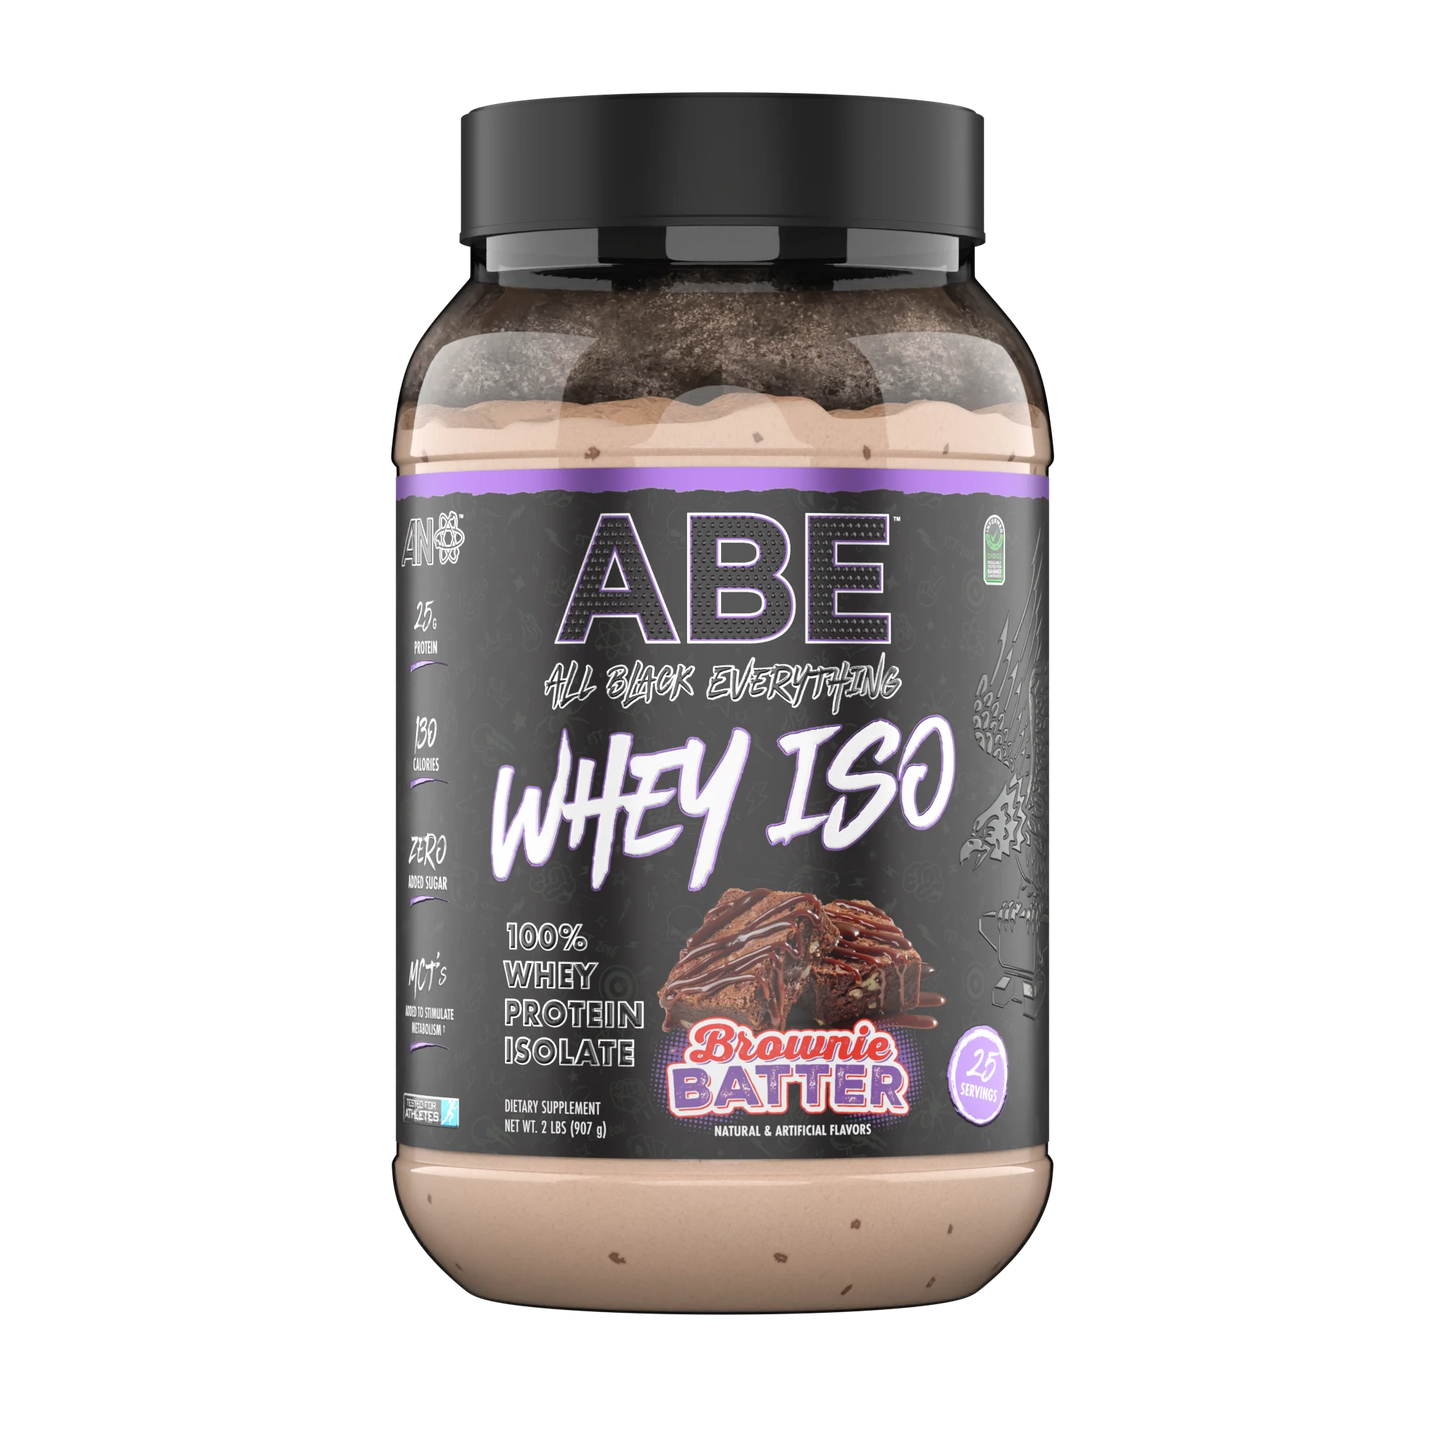 ABE All Black Everything Whey Iso Brownie batter